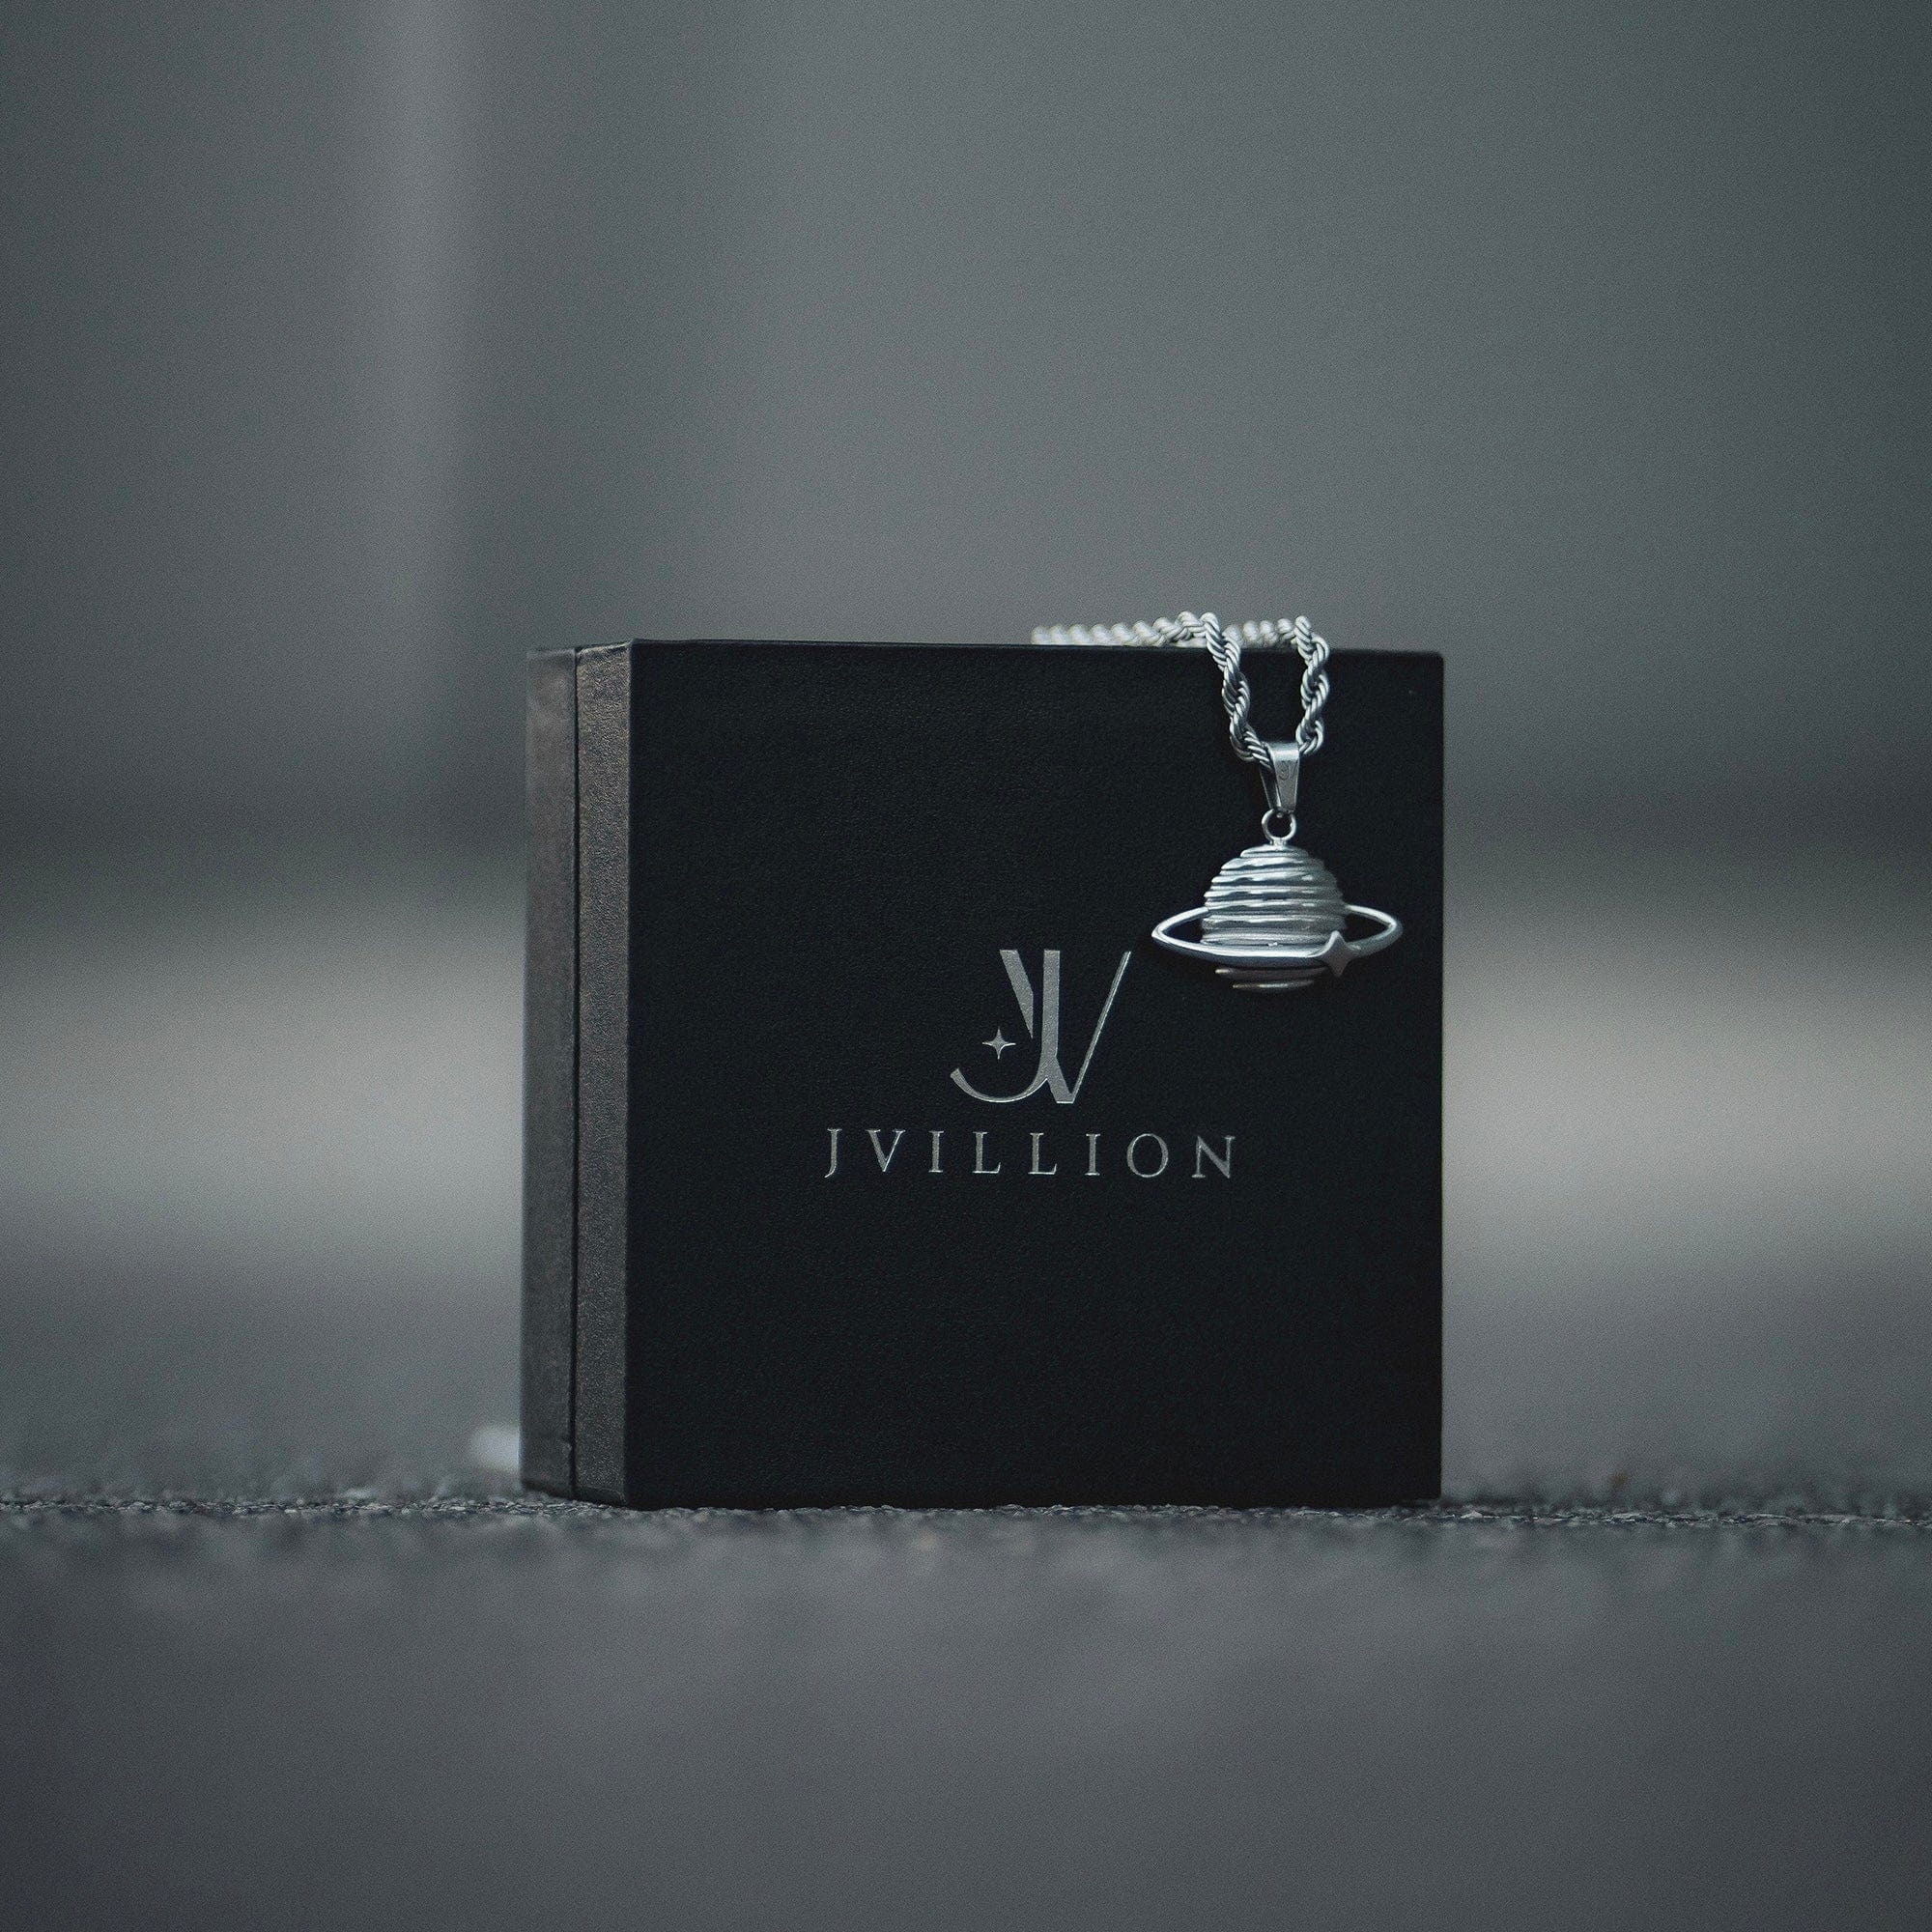 Planet Rope Chain - Silver (3mm) Chain with Pendant JVILLION